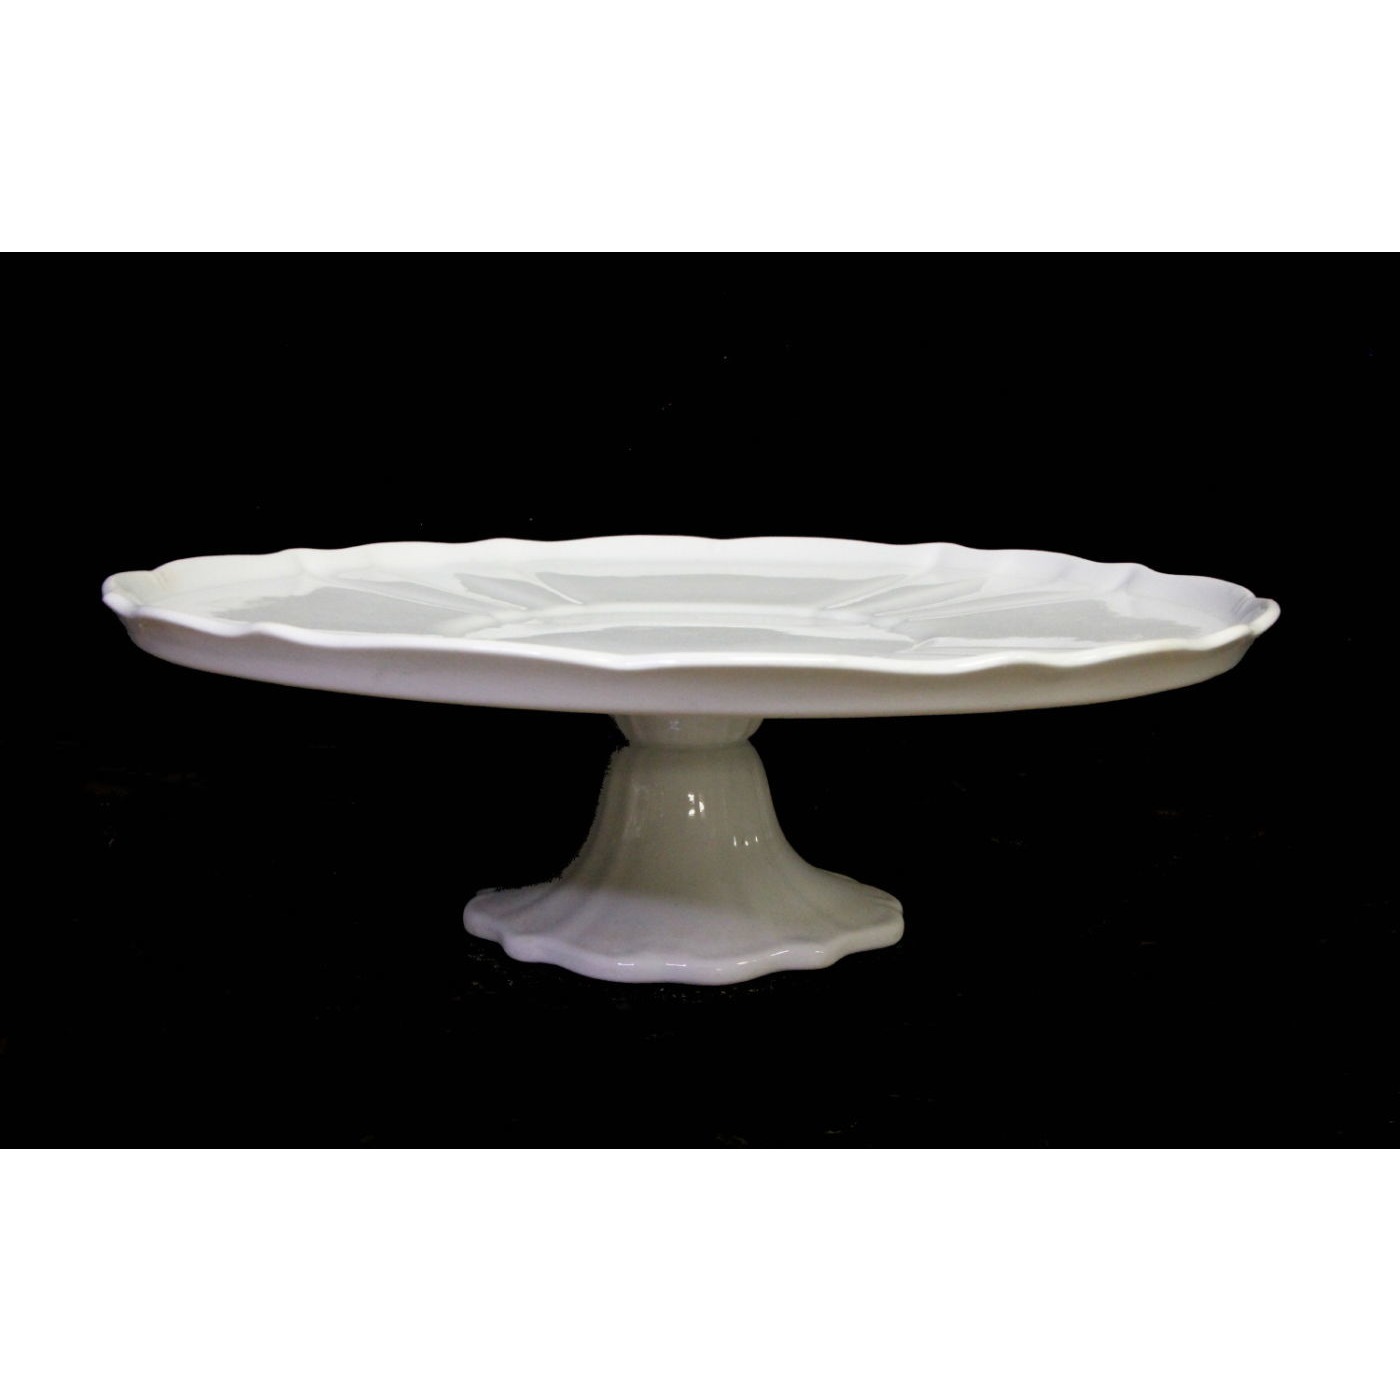 Incredible 14" Ironstone Cake Stand One-Of-A-Kind Embossed Plate